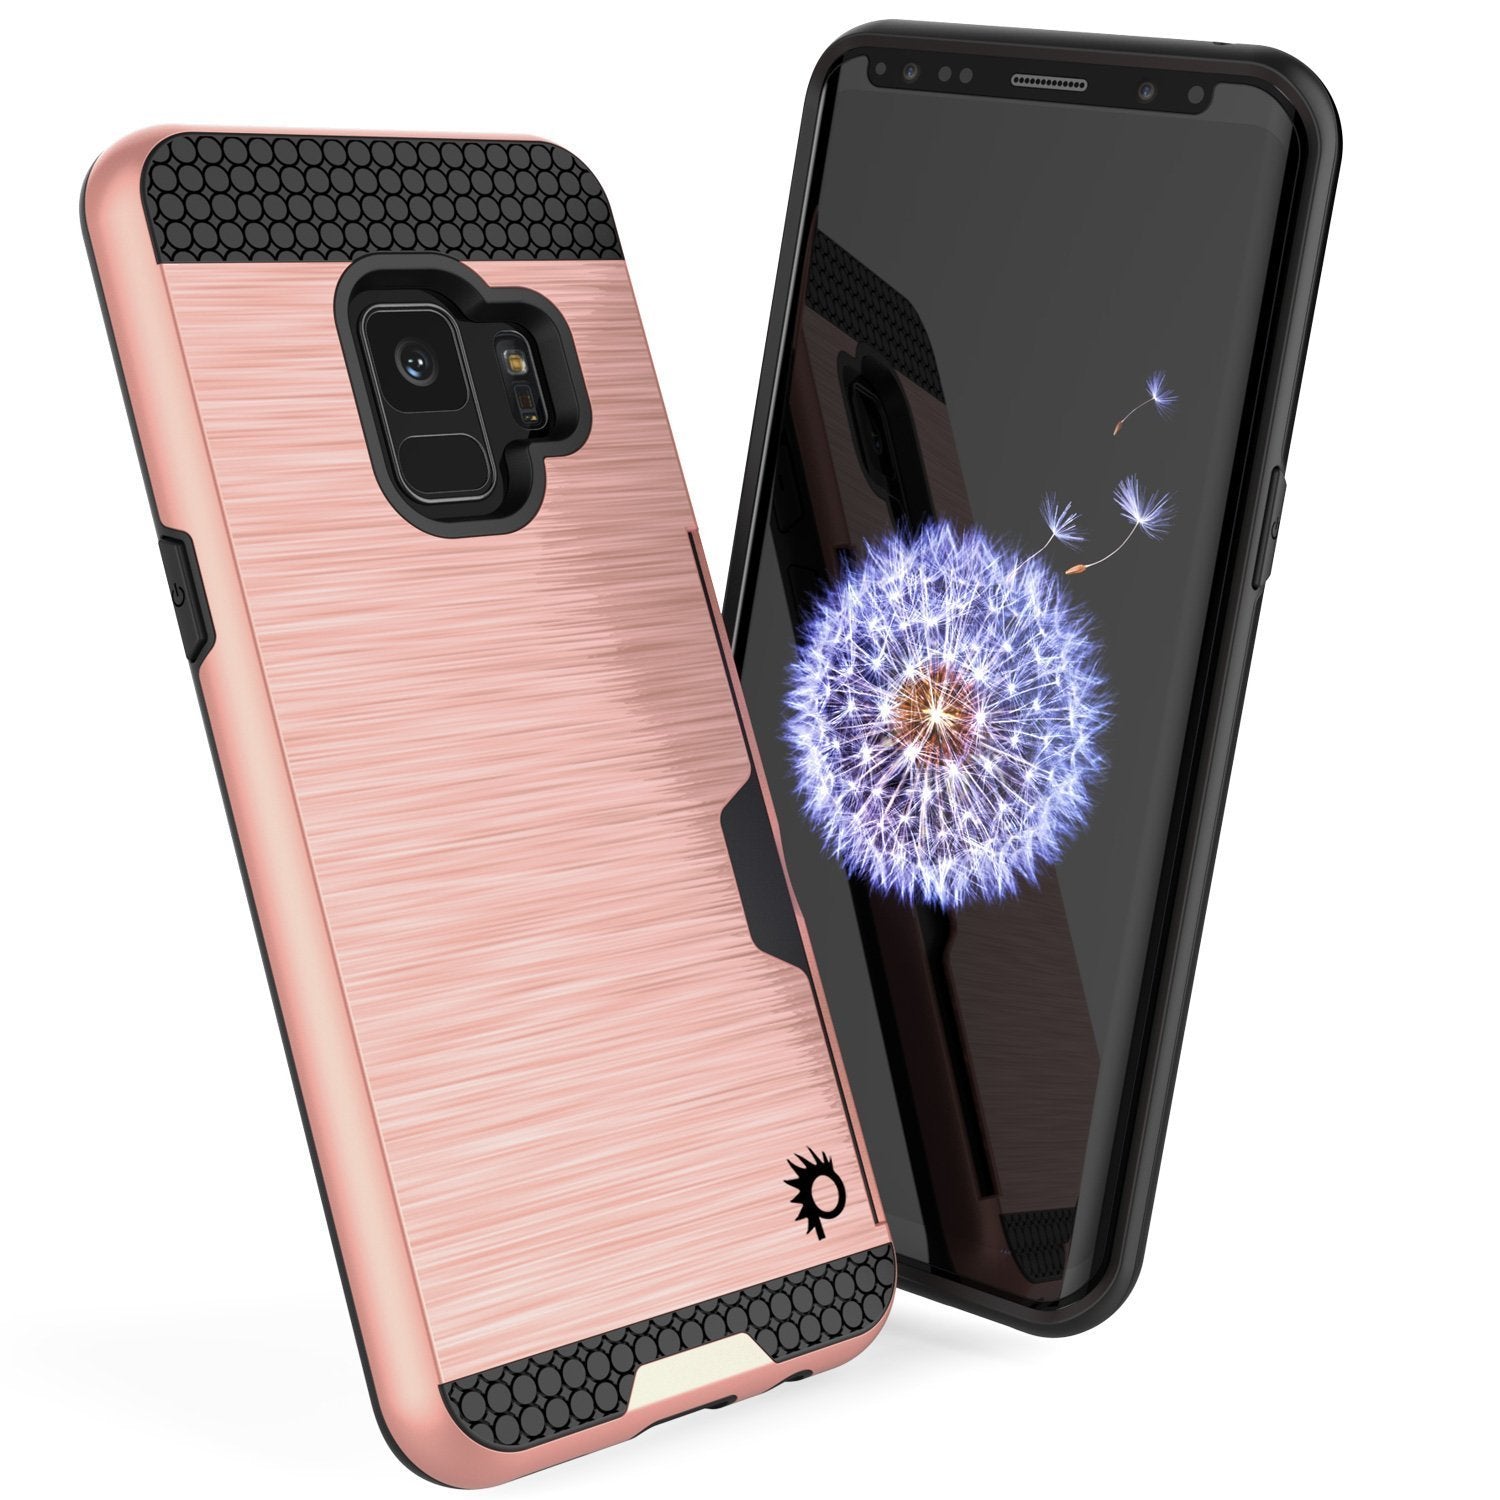 Galaxy S9 Case, PUNKcase [SLOT Series] [Slim Fit] Dual-Layer Armor Cover w/Integrated Anti-Shock System, Credit Card Slot [Rose Gold]